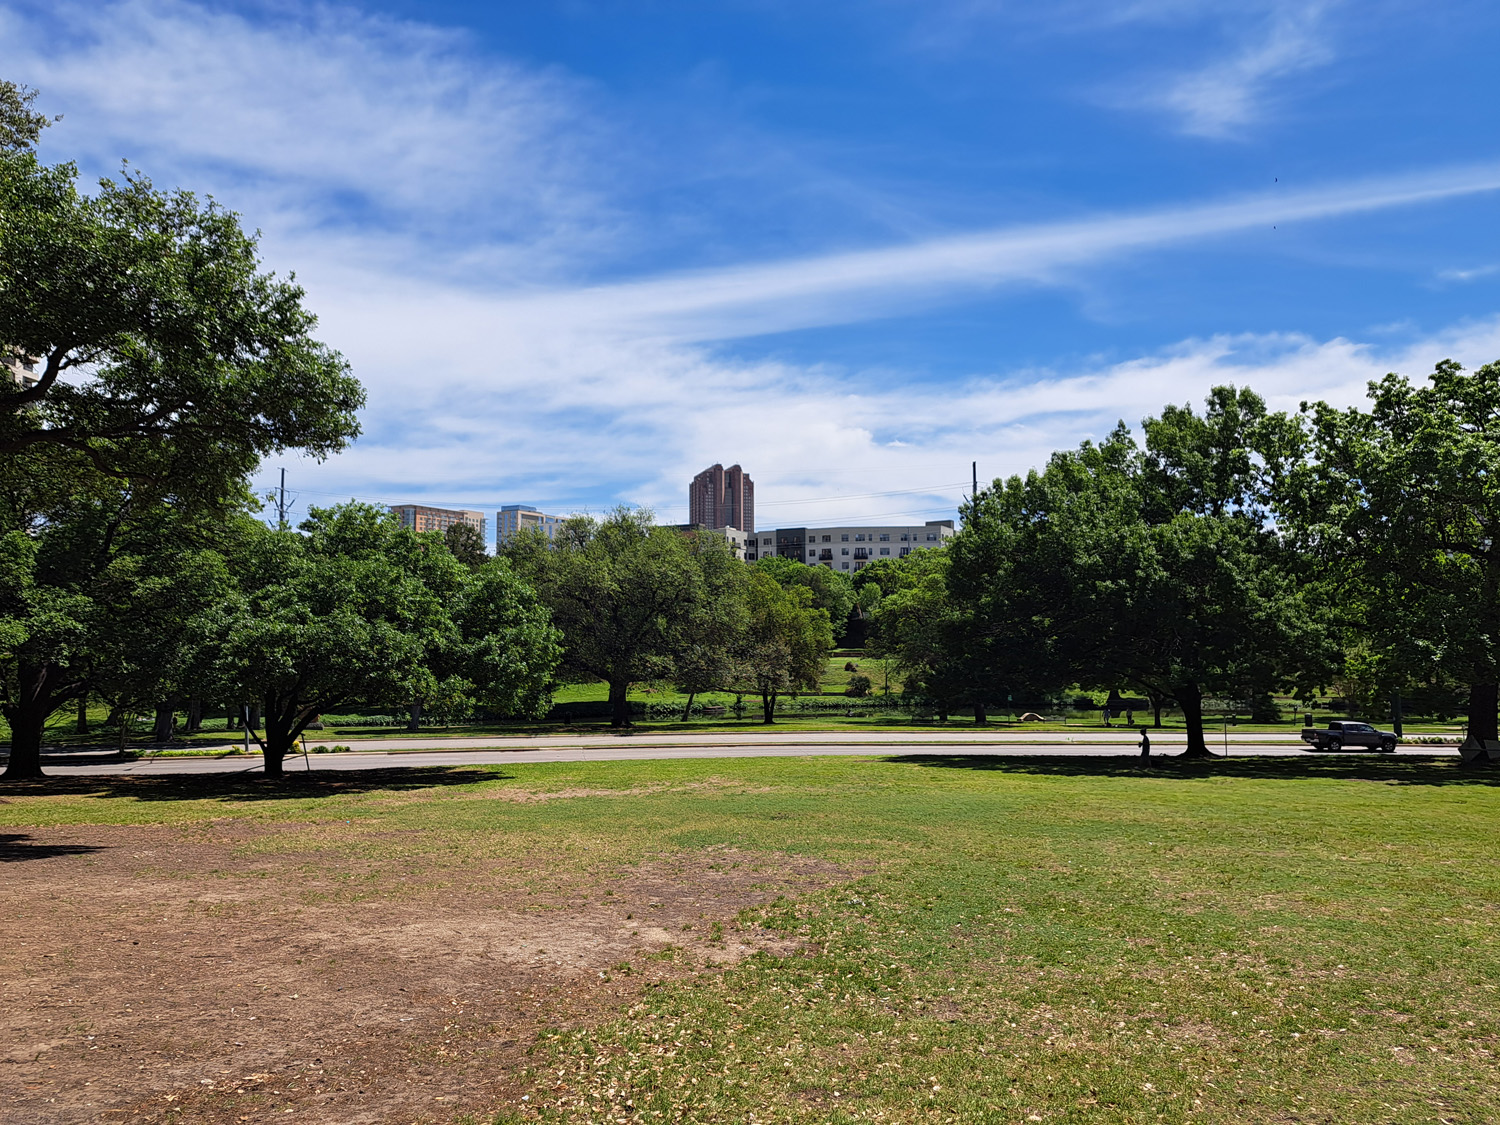 A grassy field enclosed by trees with a river and building in the background, under mostly clear skies.